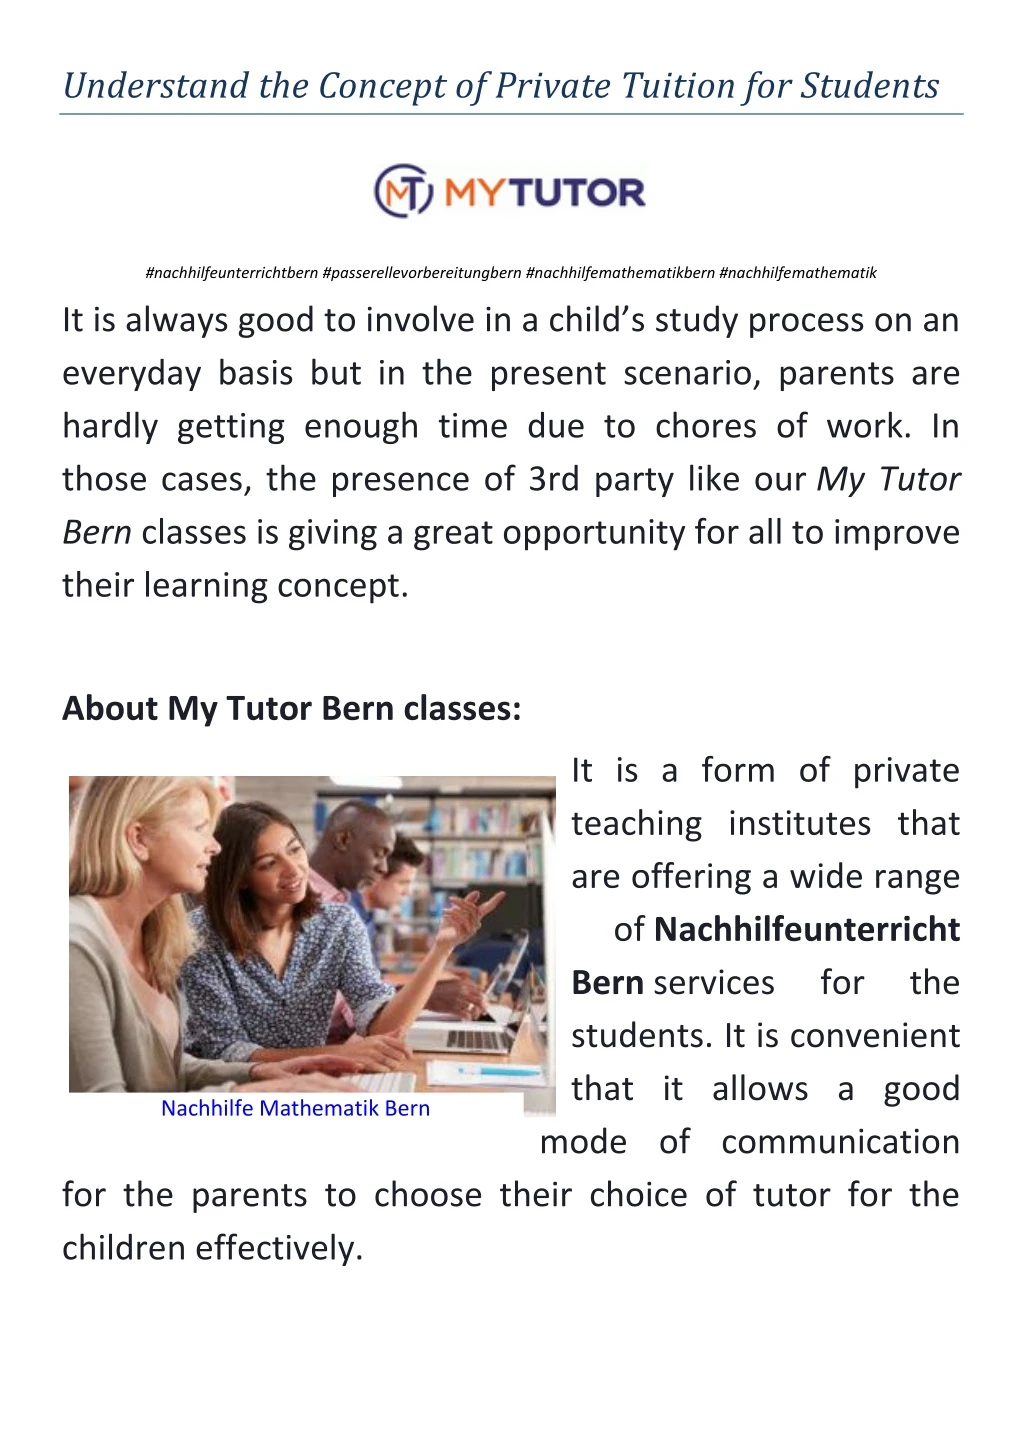 understand the concept of private tuition